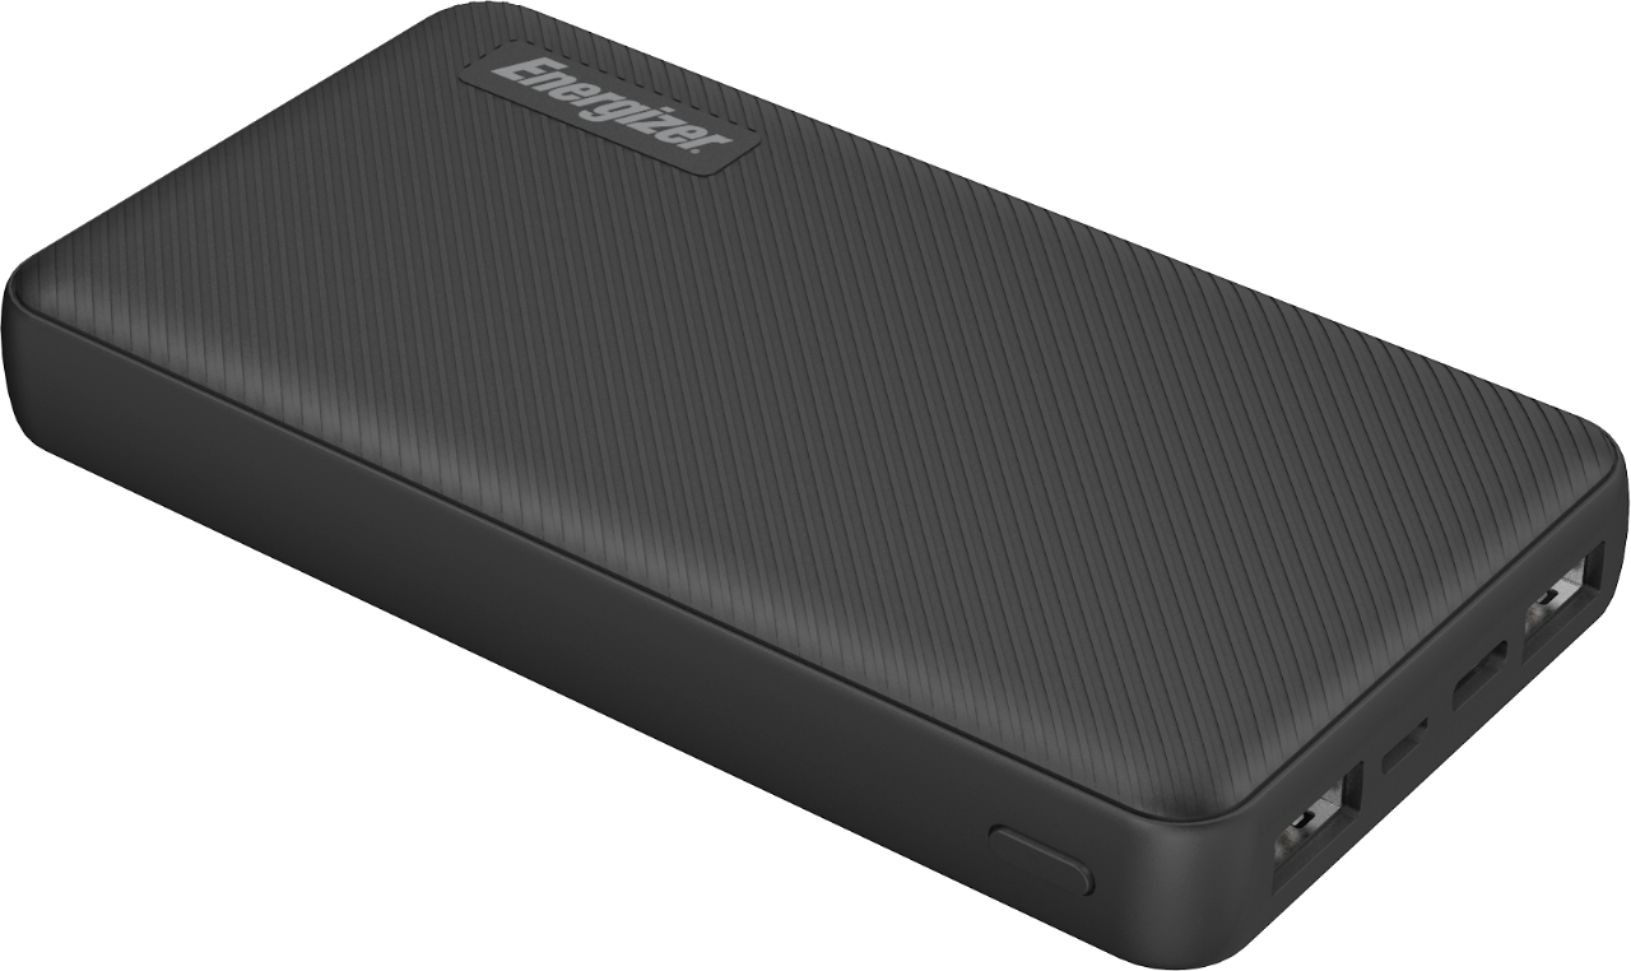 Energizer - MAX 15,000mAh Ultra-Slim High Speed Universal Portable Charger for Apple, Android, Google, Samsung & USB Enabled Devices - Black